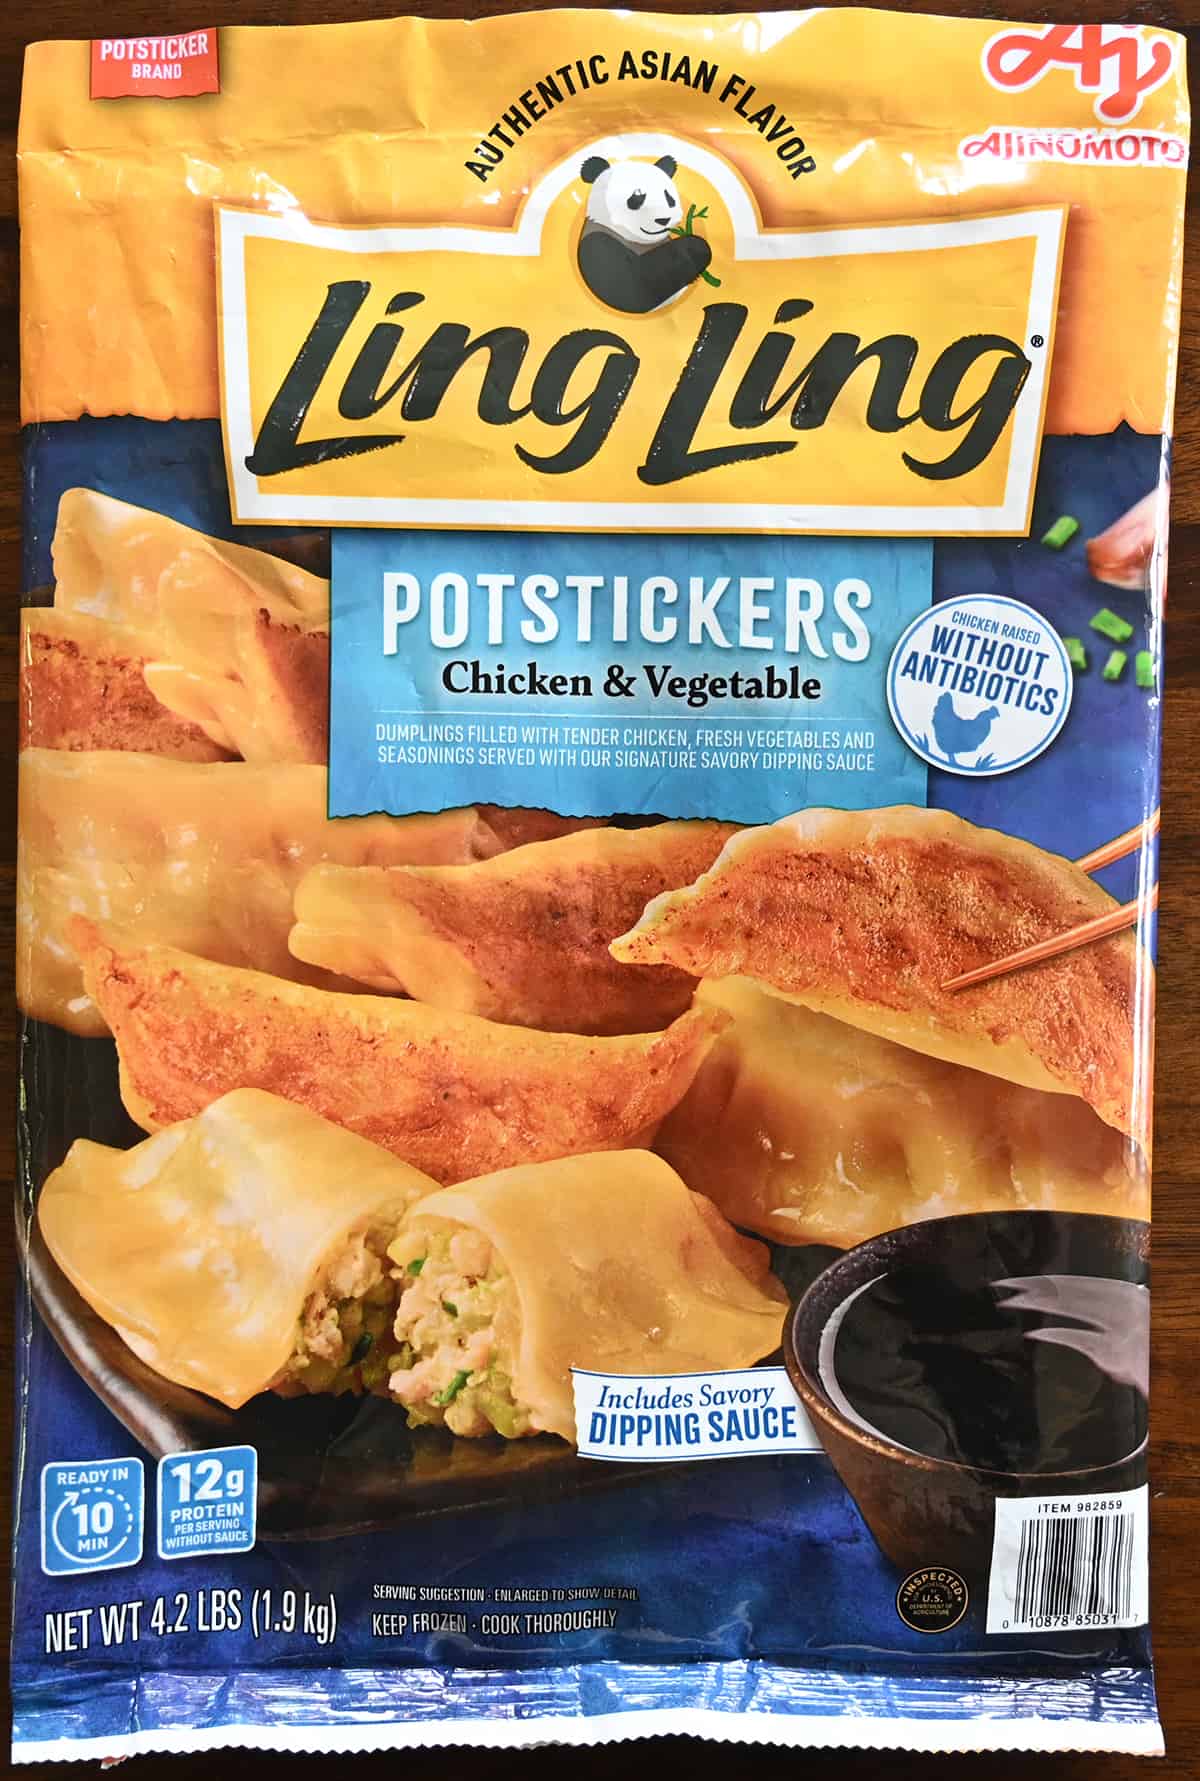 Closeup image of the front of the bag of potstickers showing size of the bag and that they're made with chicken raised without antibiotics.